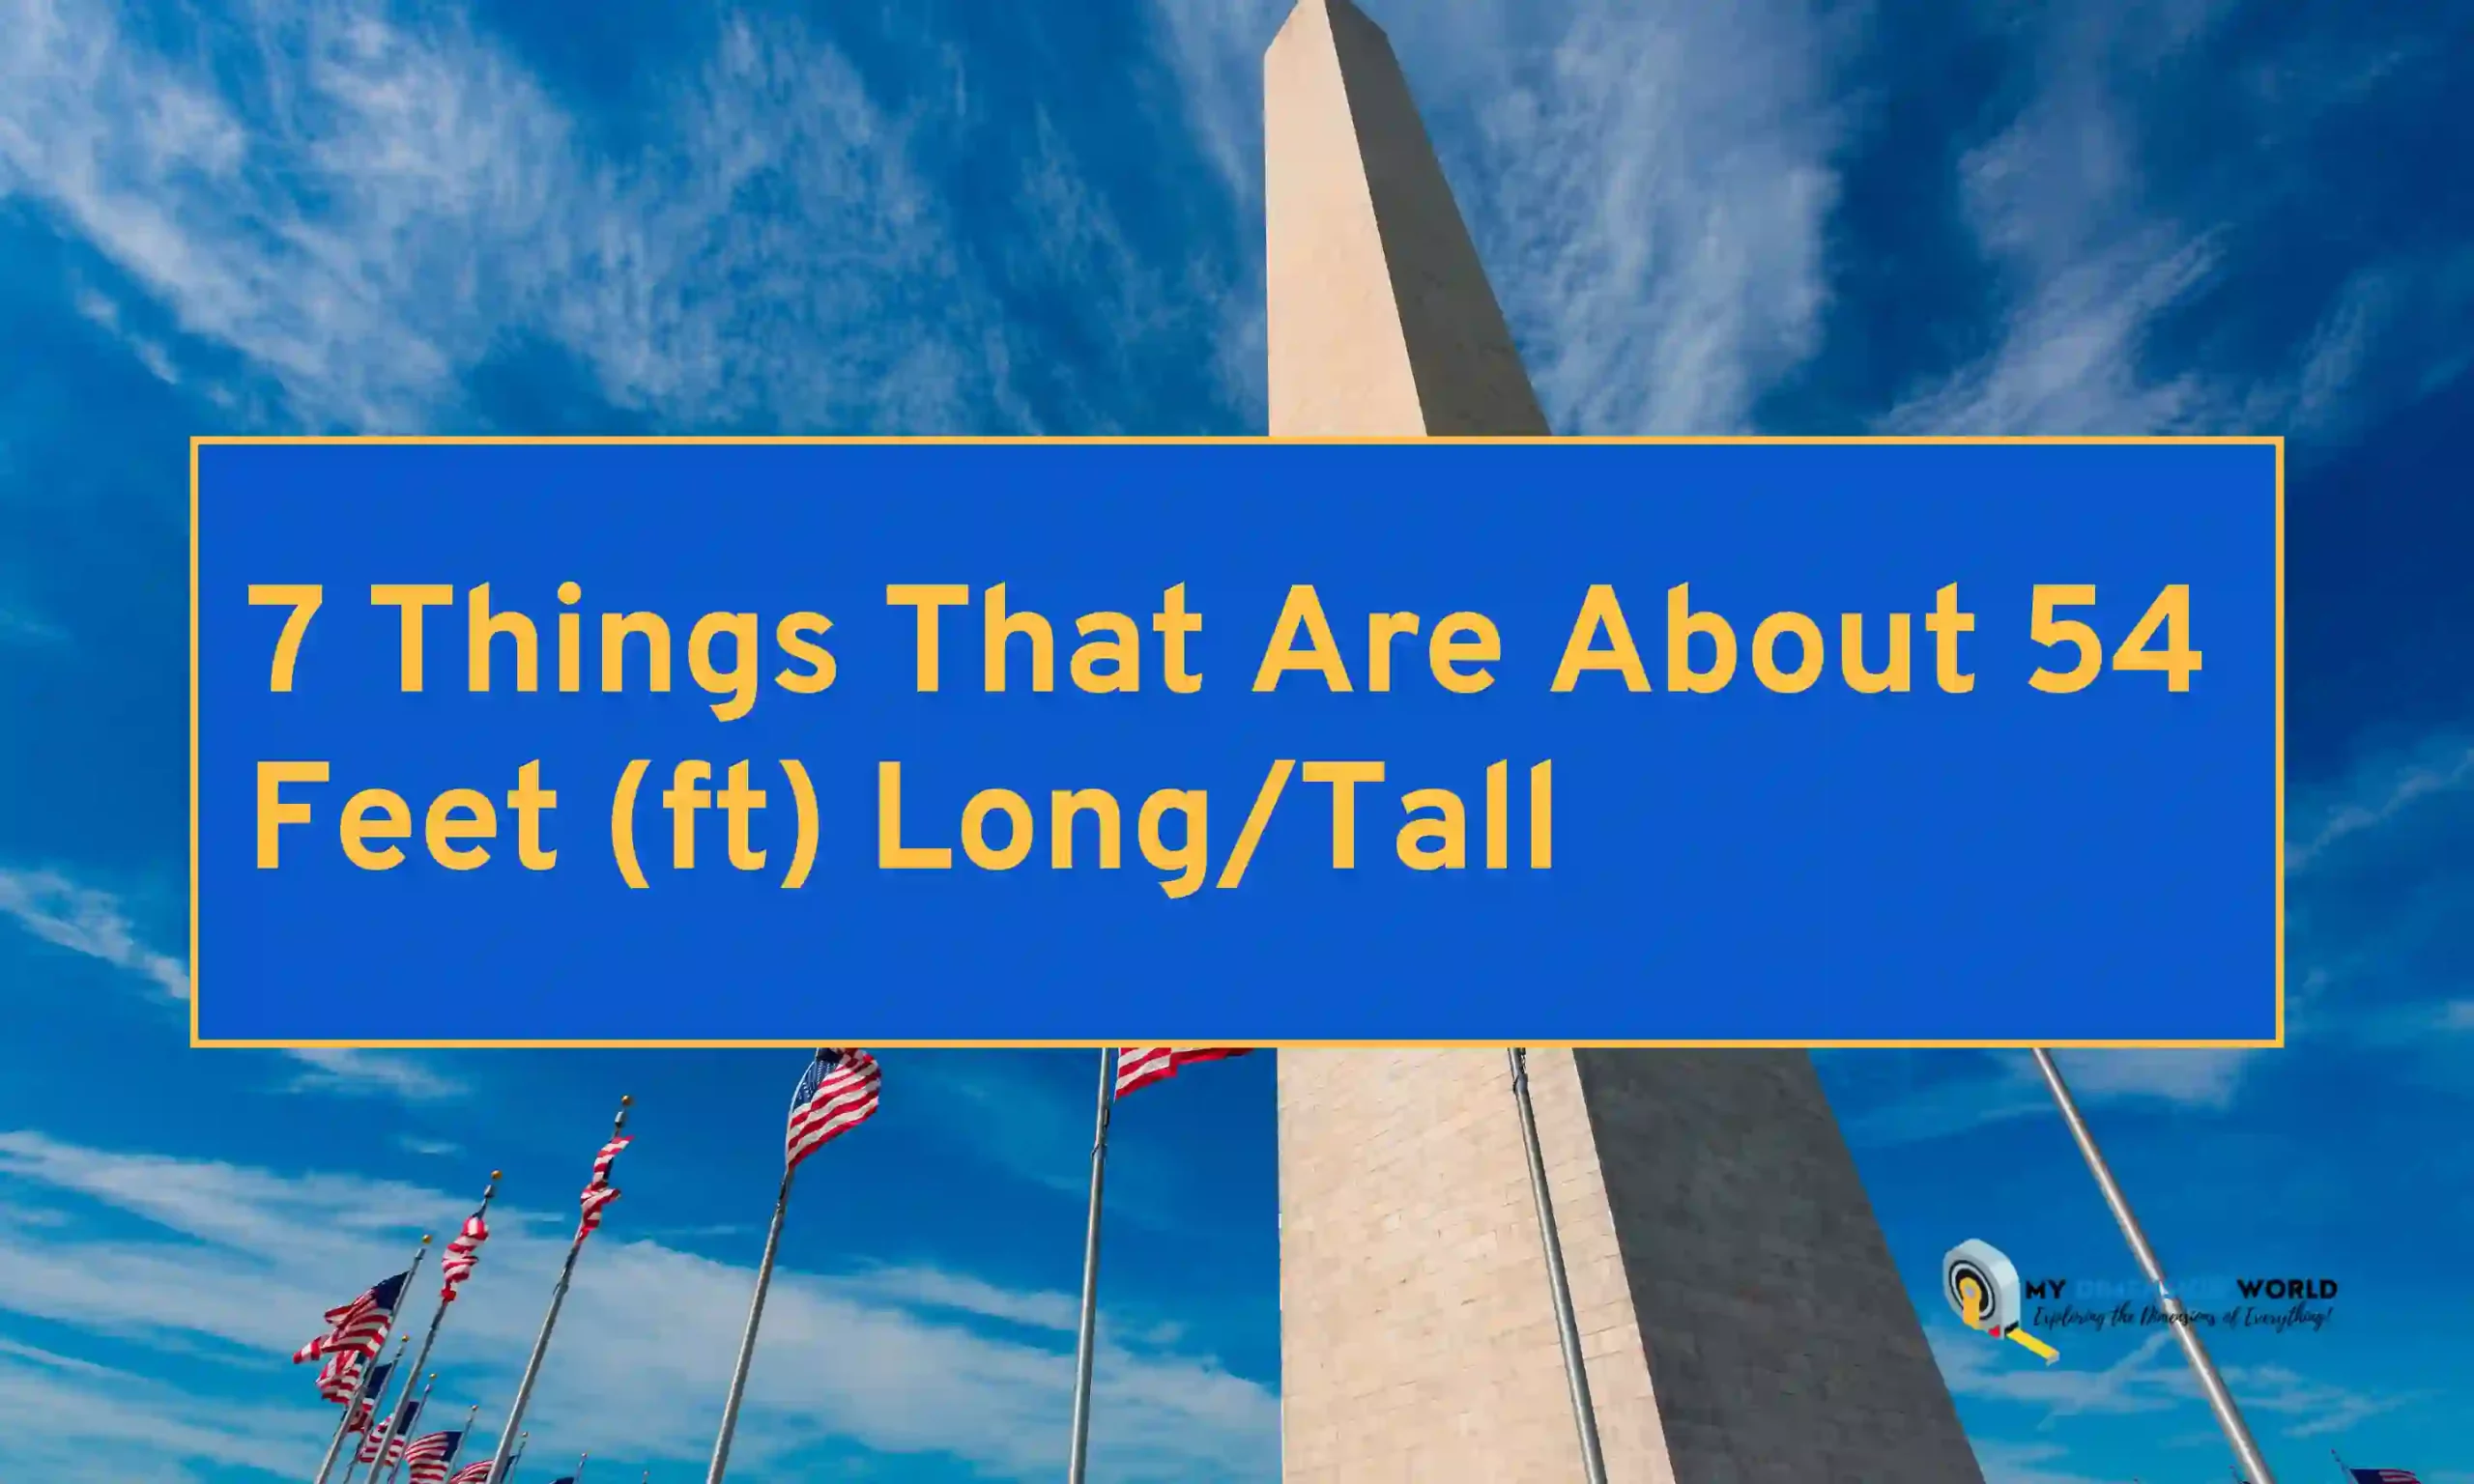 7 Things That Are About 54 Feet (ft) LongTall